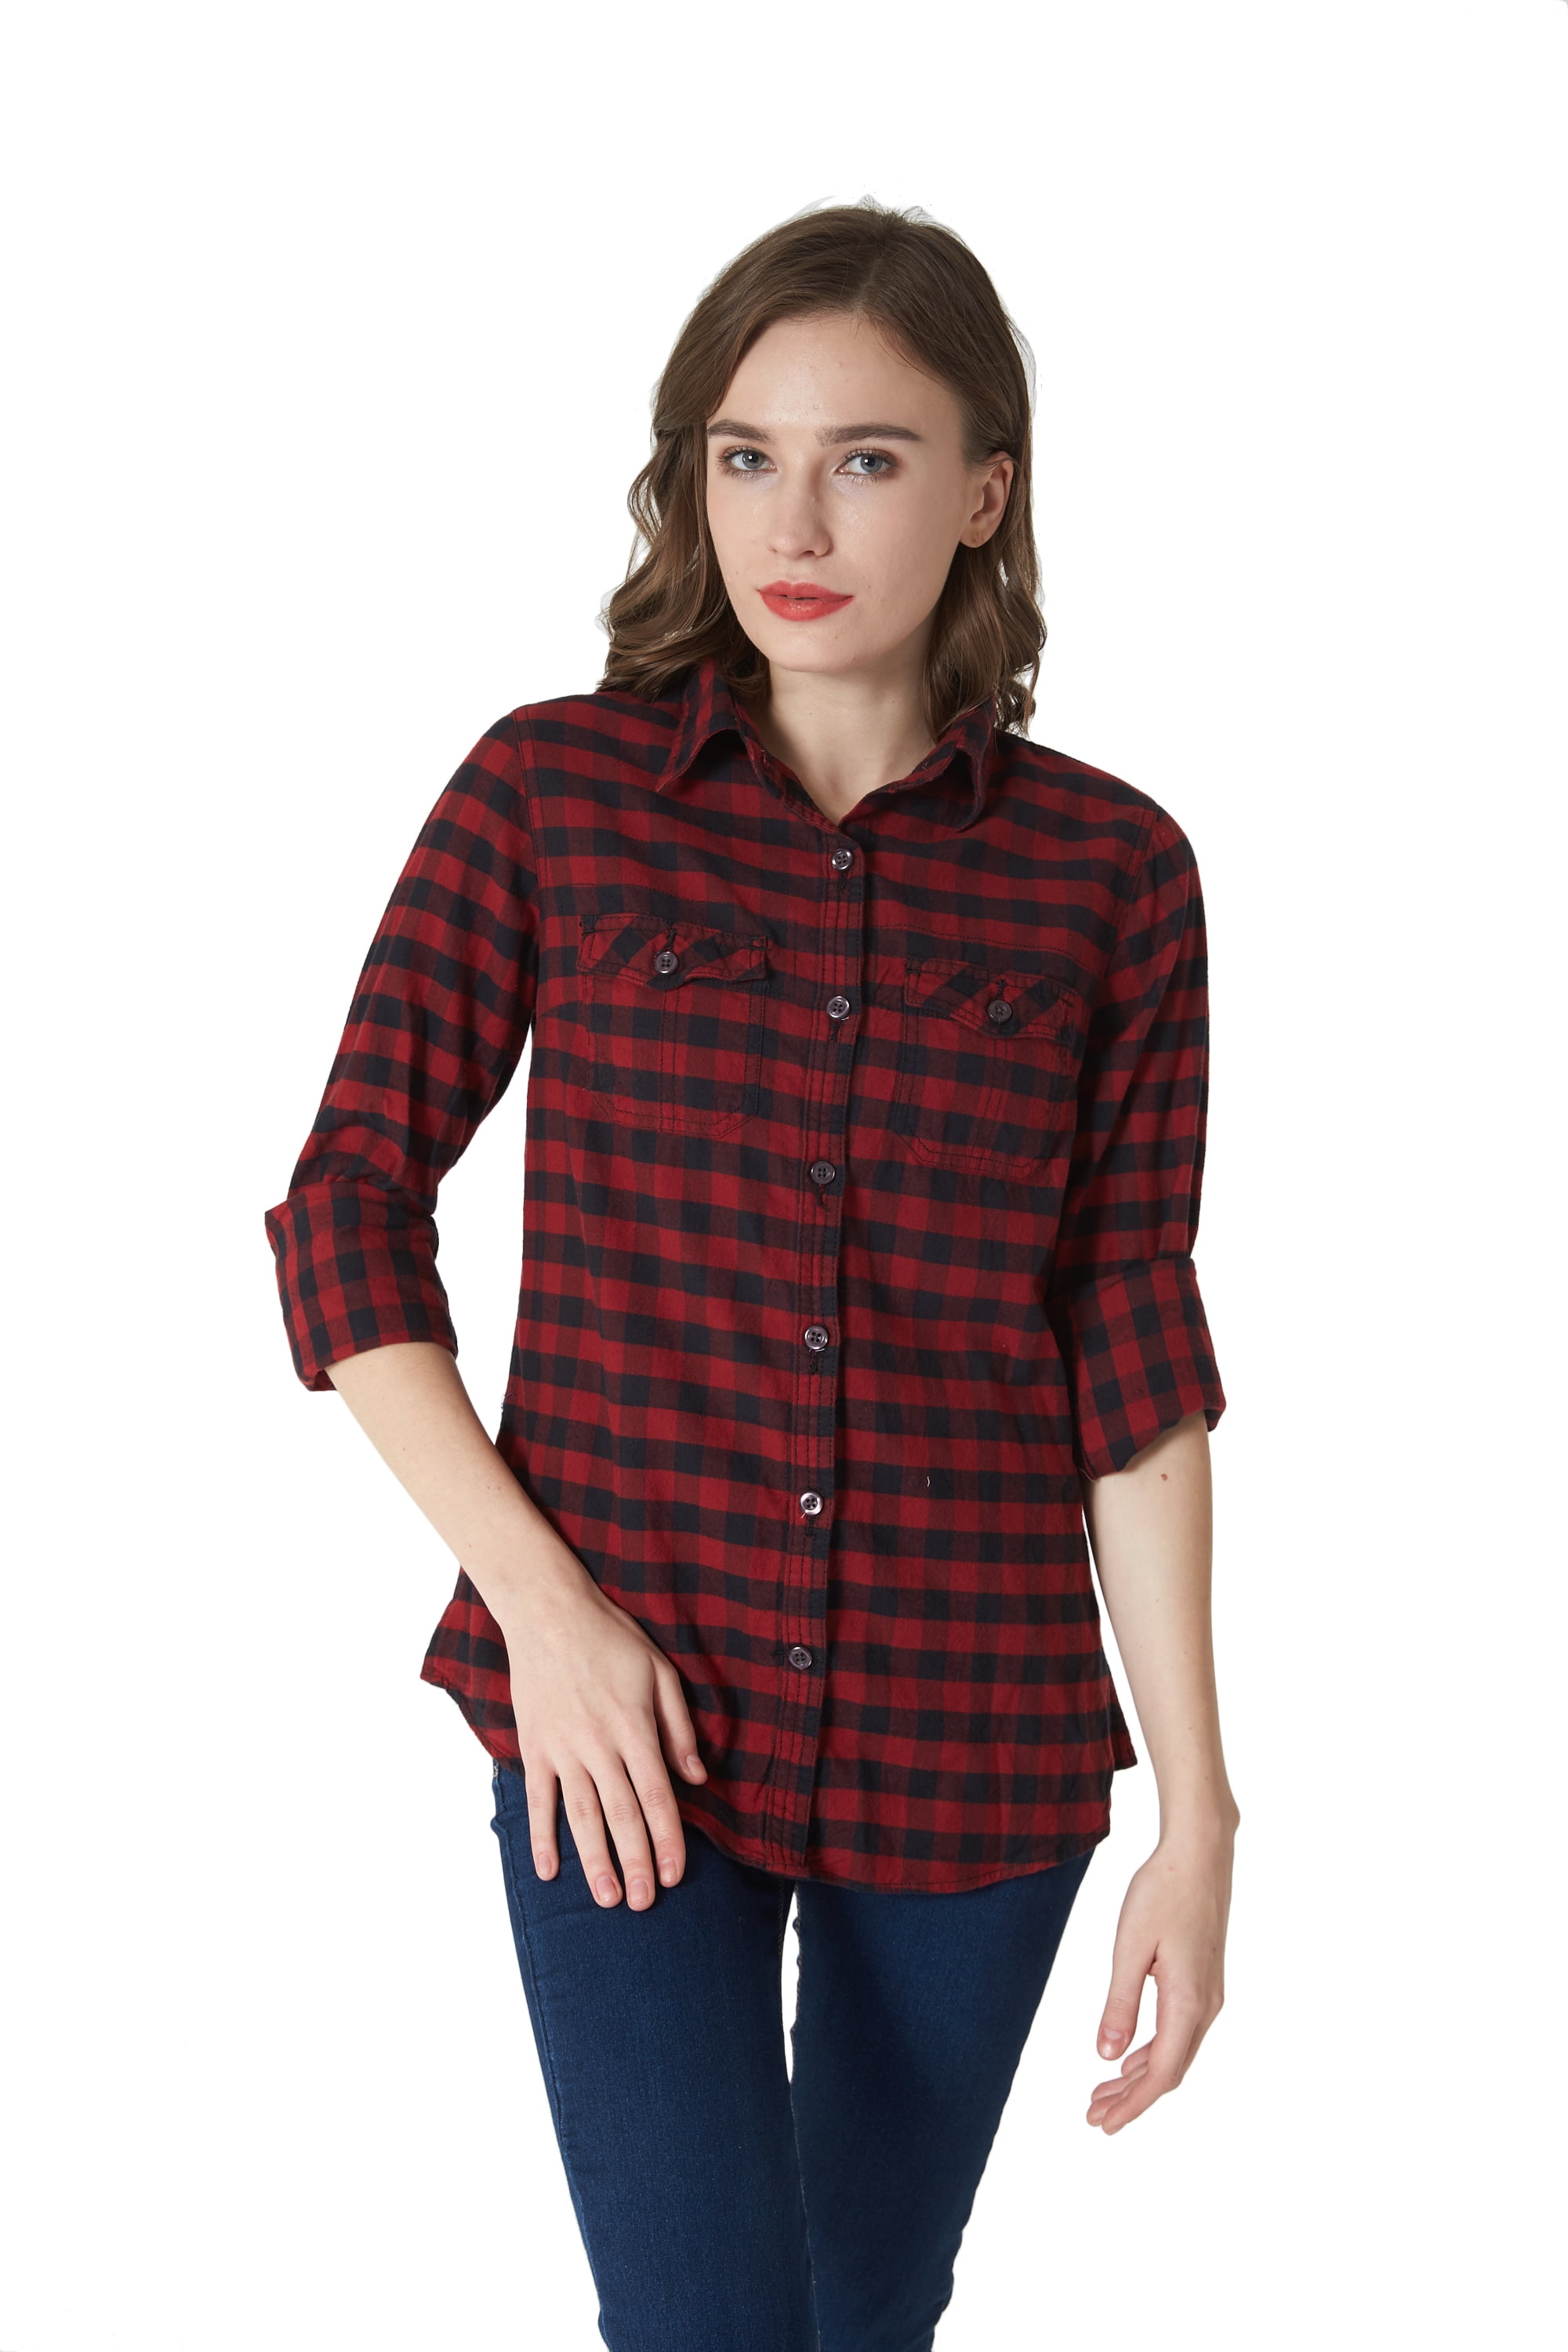 Women's Flannel Shirt 100% Cotton Pre Washed Vintage Look Full Sleve ...